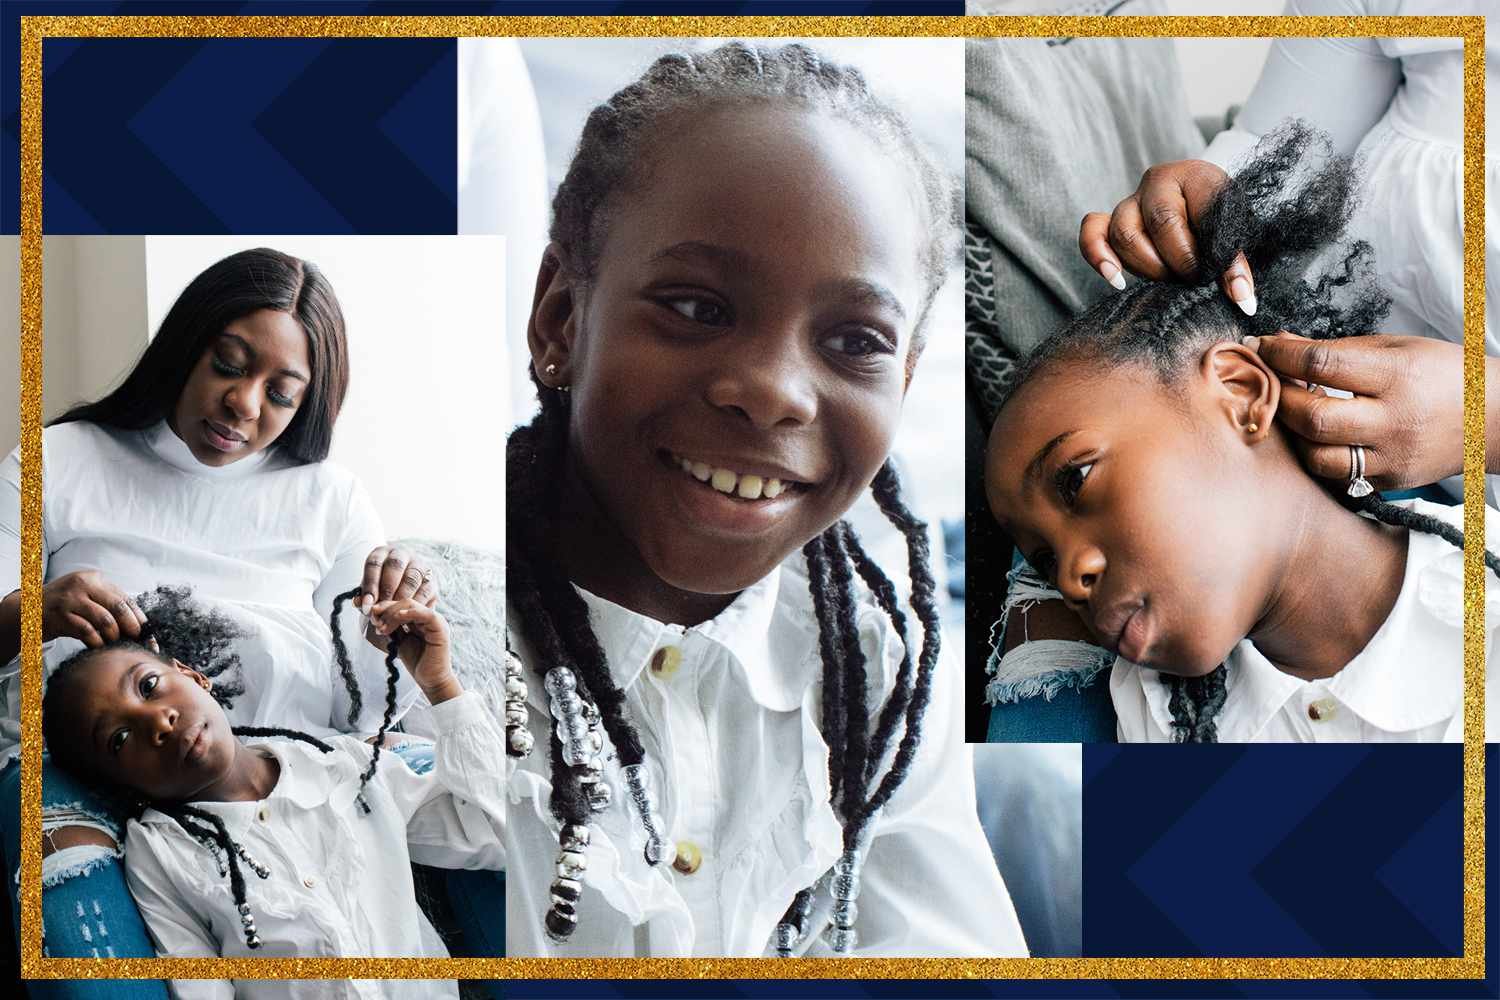 Braids Guided Our Ancestors to Freedom—They Can Bring Our Children Freedom, Too